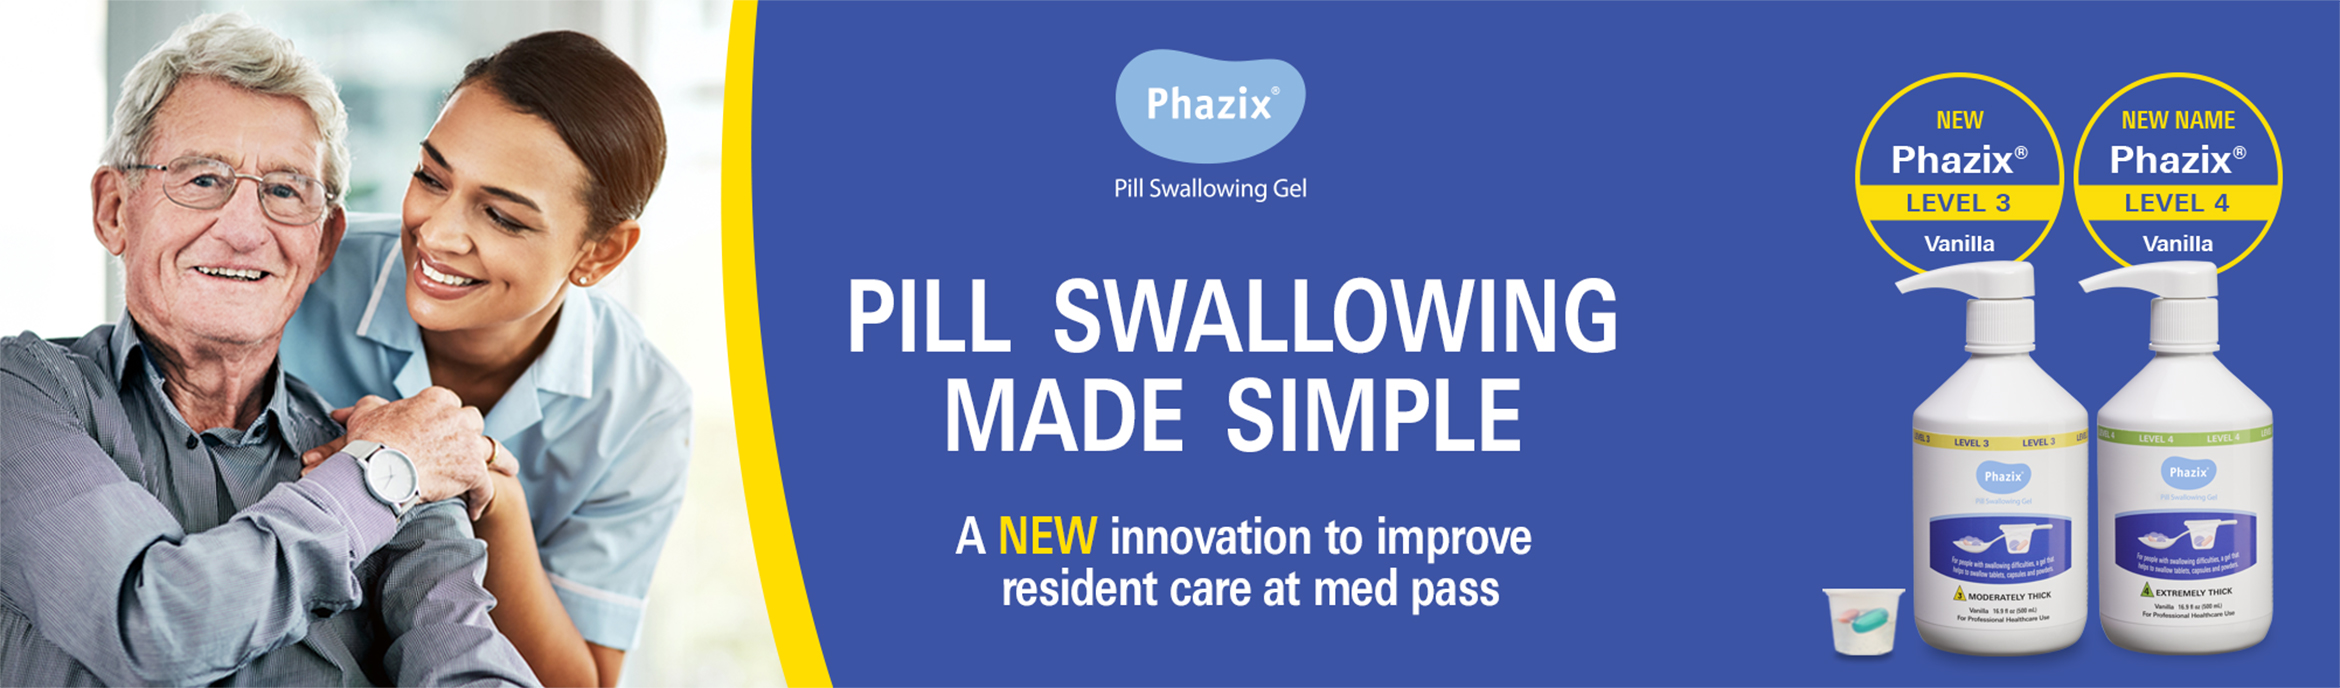 Phazix - Pill swallowing made simple